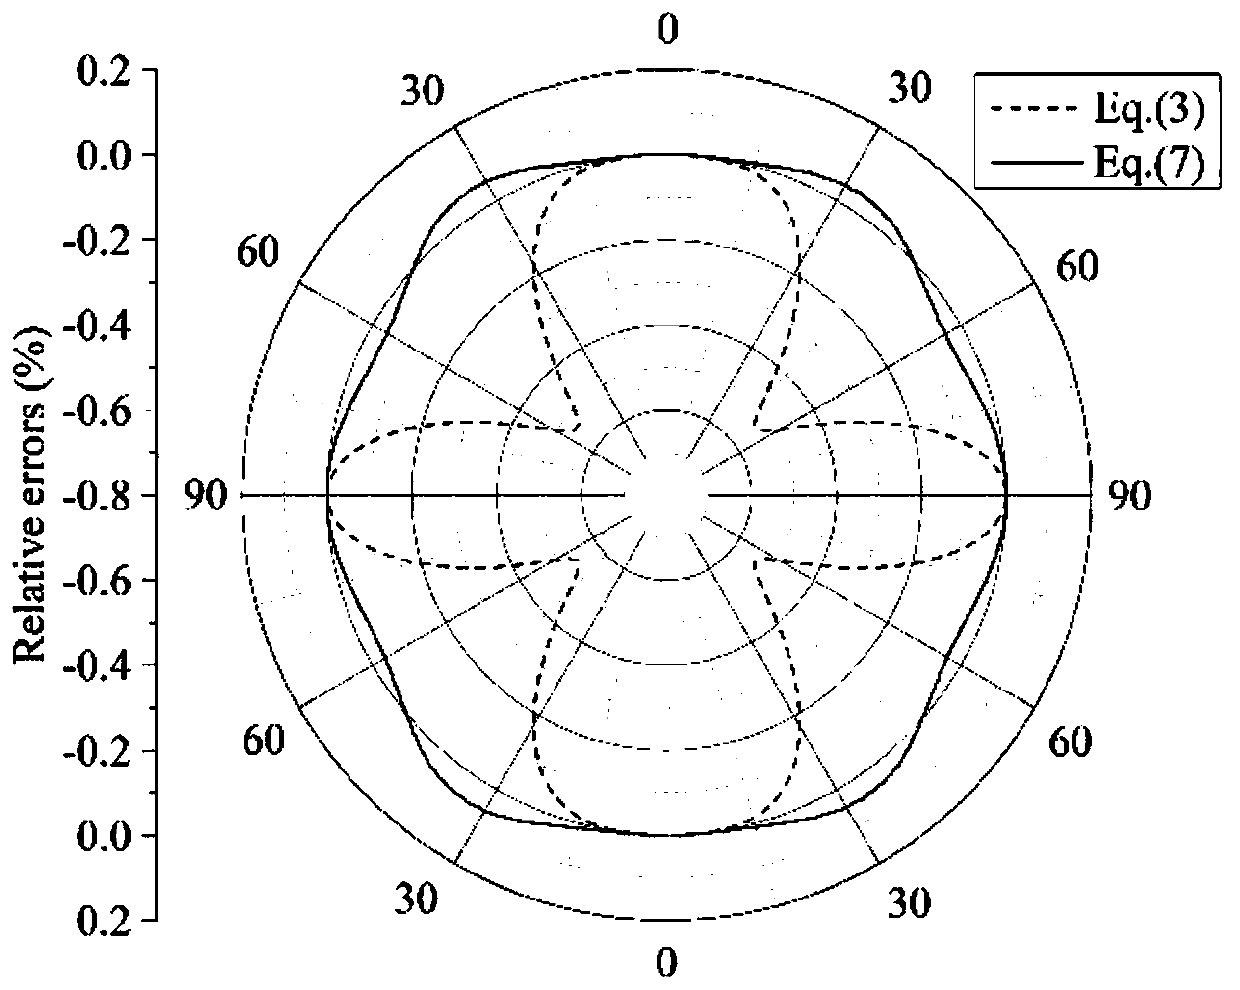 Acoustic anisotropic reverse-time migration mixing method